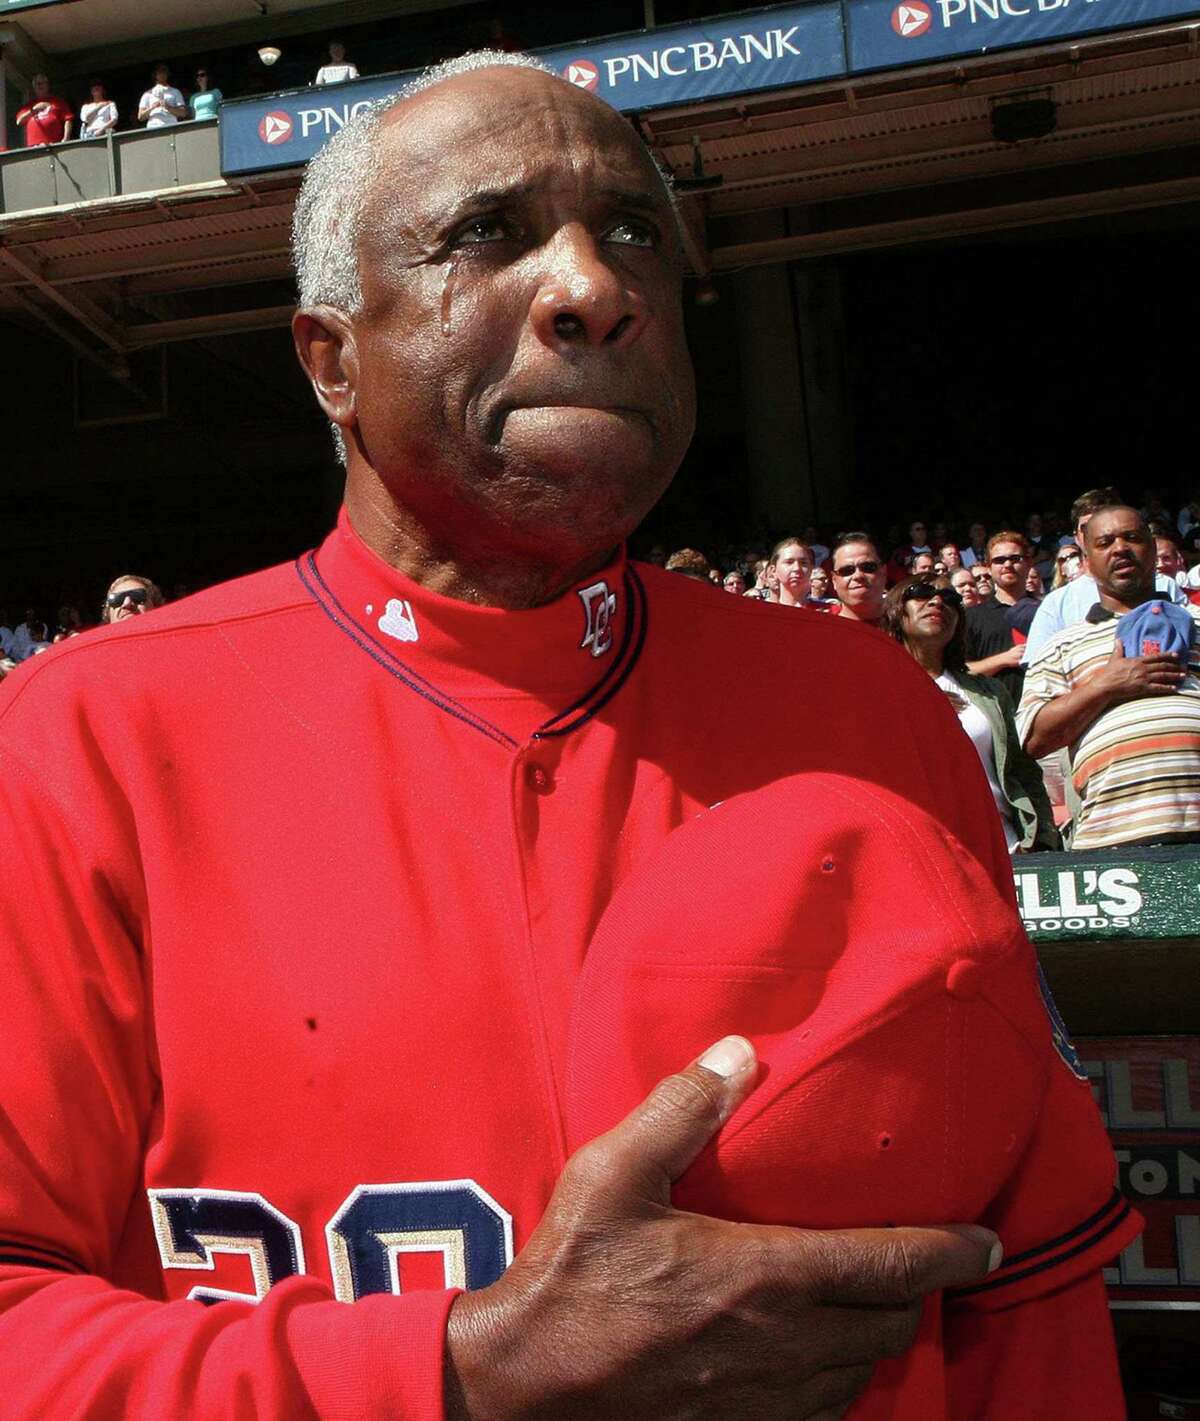 A tear rolls down the cheek of Washington Nationals Manager Frank Robinson as he listens to the national anthem on his last day as the Nationals manager in Washington, October 1, 2006. Robinson, a 71-year-old Hall of Famer, has not been asked to return to the Nationals for next year's season. REUTERS/Joshua Roberts (UNITED STATES) Ran on: 10-02-2006 Frank Robinson, left, shows emotion on his last day as manager of the Nationals; Dusty and Darren Baker enjoy their Cubs uniforms. Ran on: 10-02-2006 Frank Robinson, left, shows emotion on his last day as manager of the Nationals. Dusty and Darren Baker enjoy their Cubs uniforms.